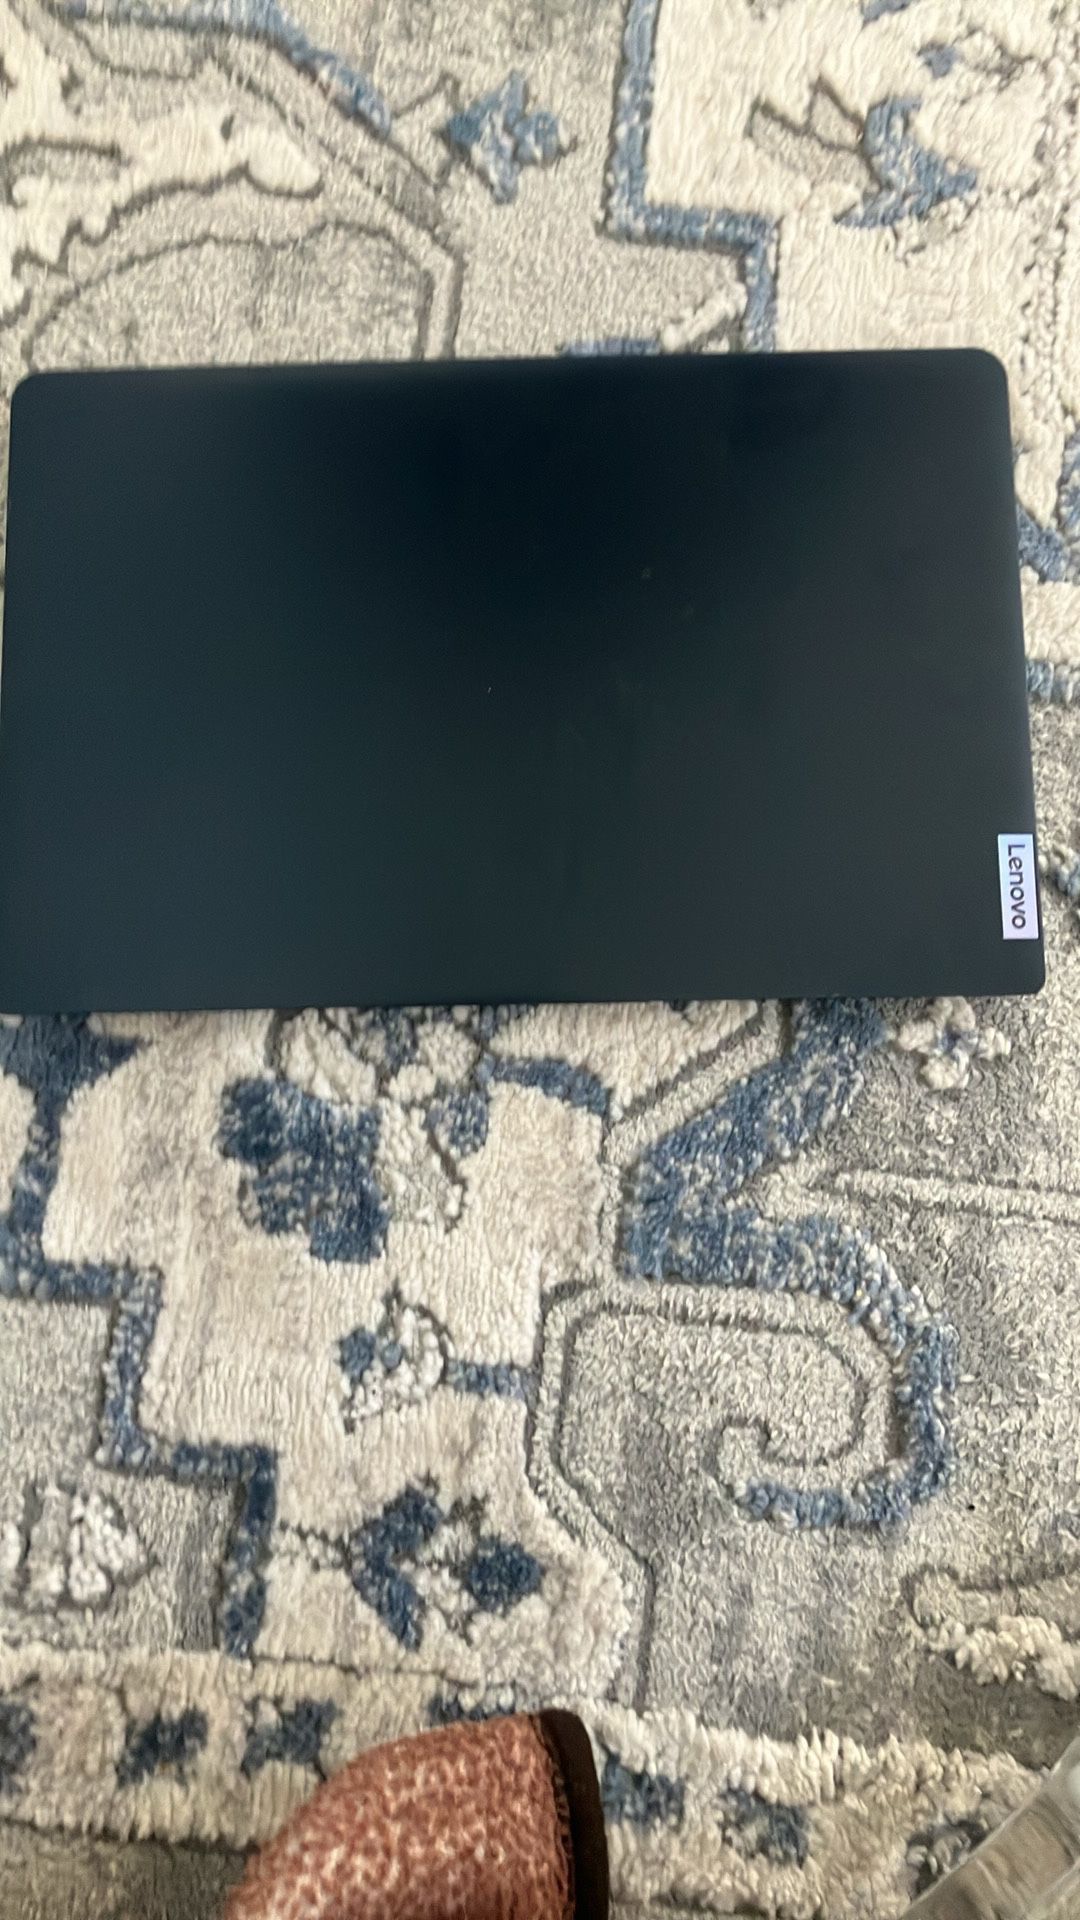 Lenovo Laptop Accepting Offers Or Trades Meet Somewhere Near Malden